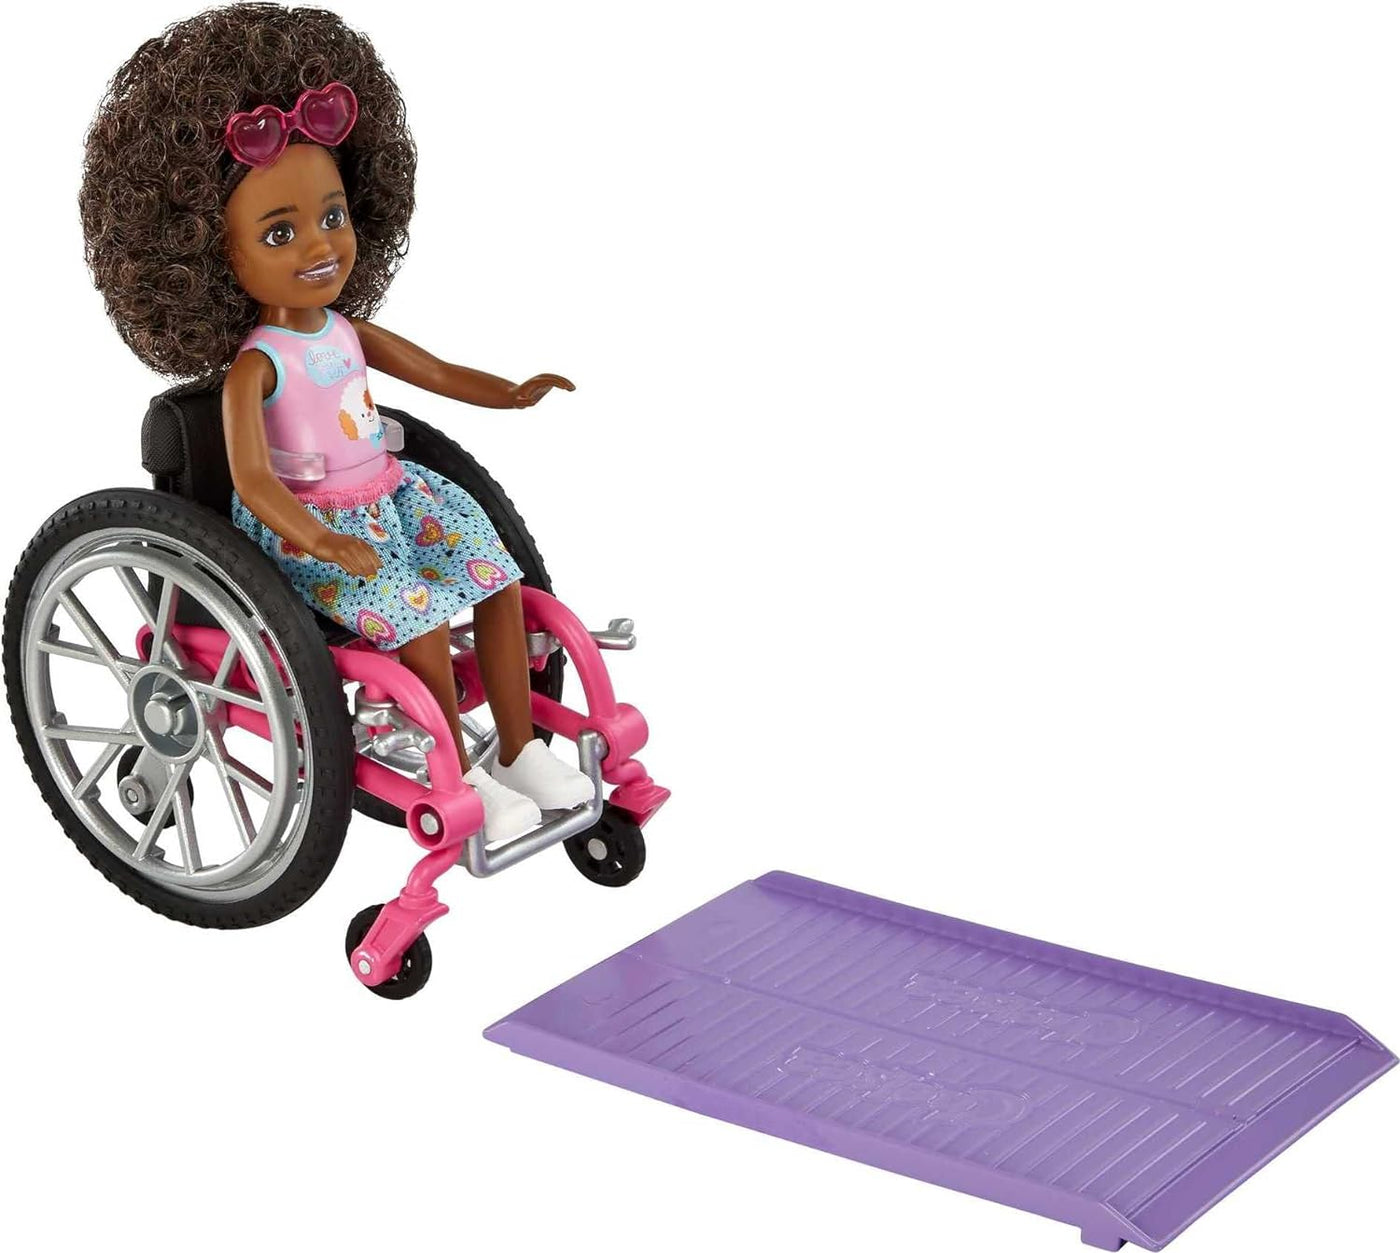 Barbie Chelsea Doll & Wheelchair with Moving Wheels, Ramp, Sticker Sheet & Accessories, Small Doll with Curly Brown Hair